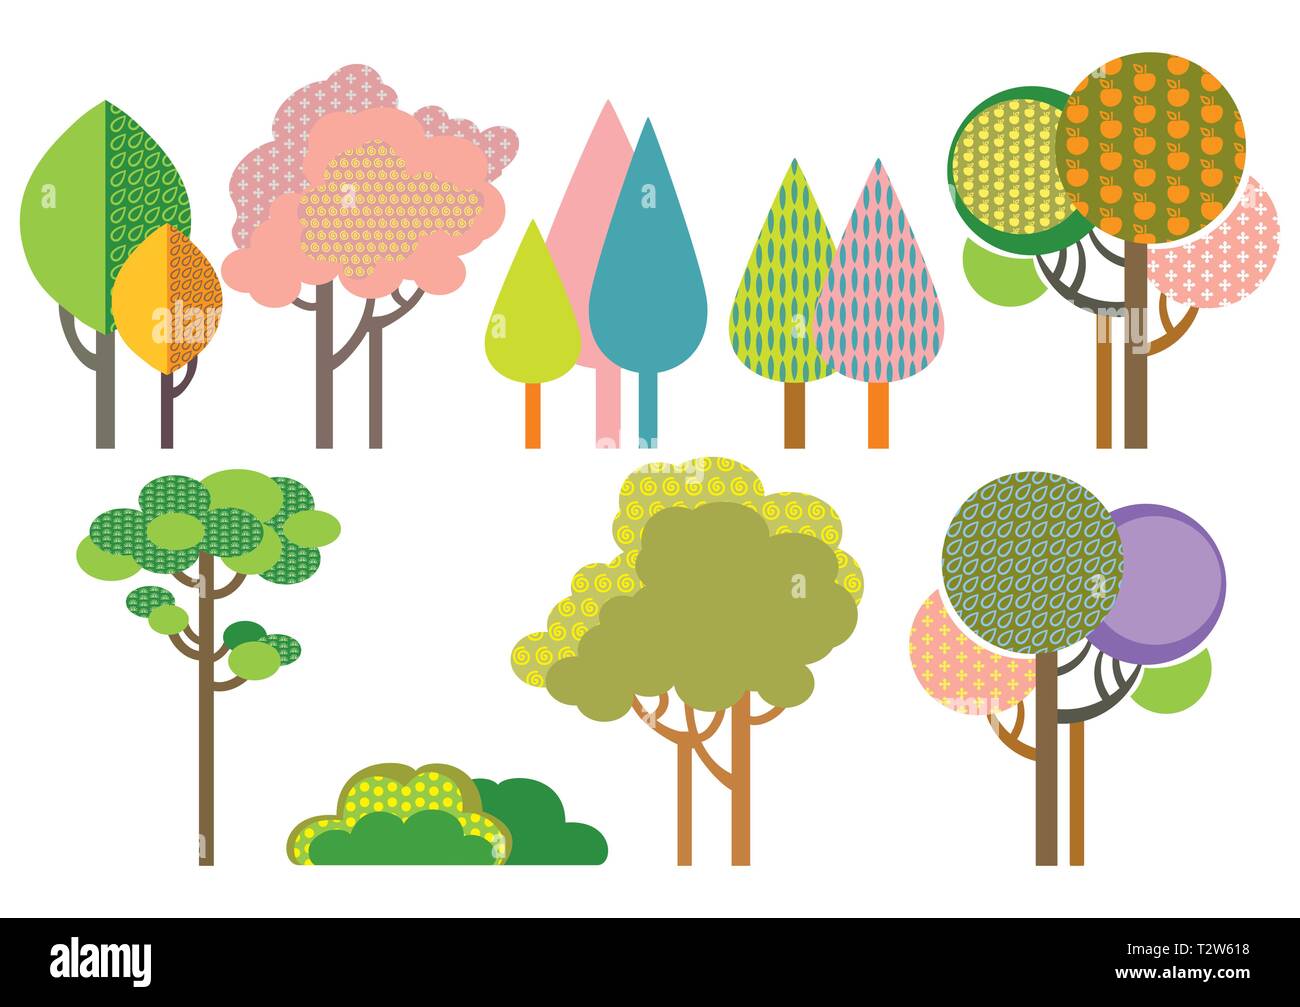 Colorful decorative outline funny trees with seamless pattern forms. Vector cartoon flat illustration in different colors isolated on white background Stock Vector